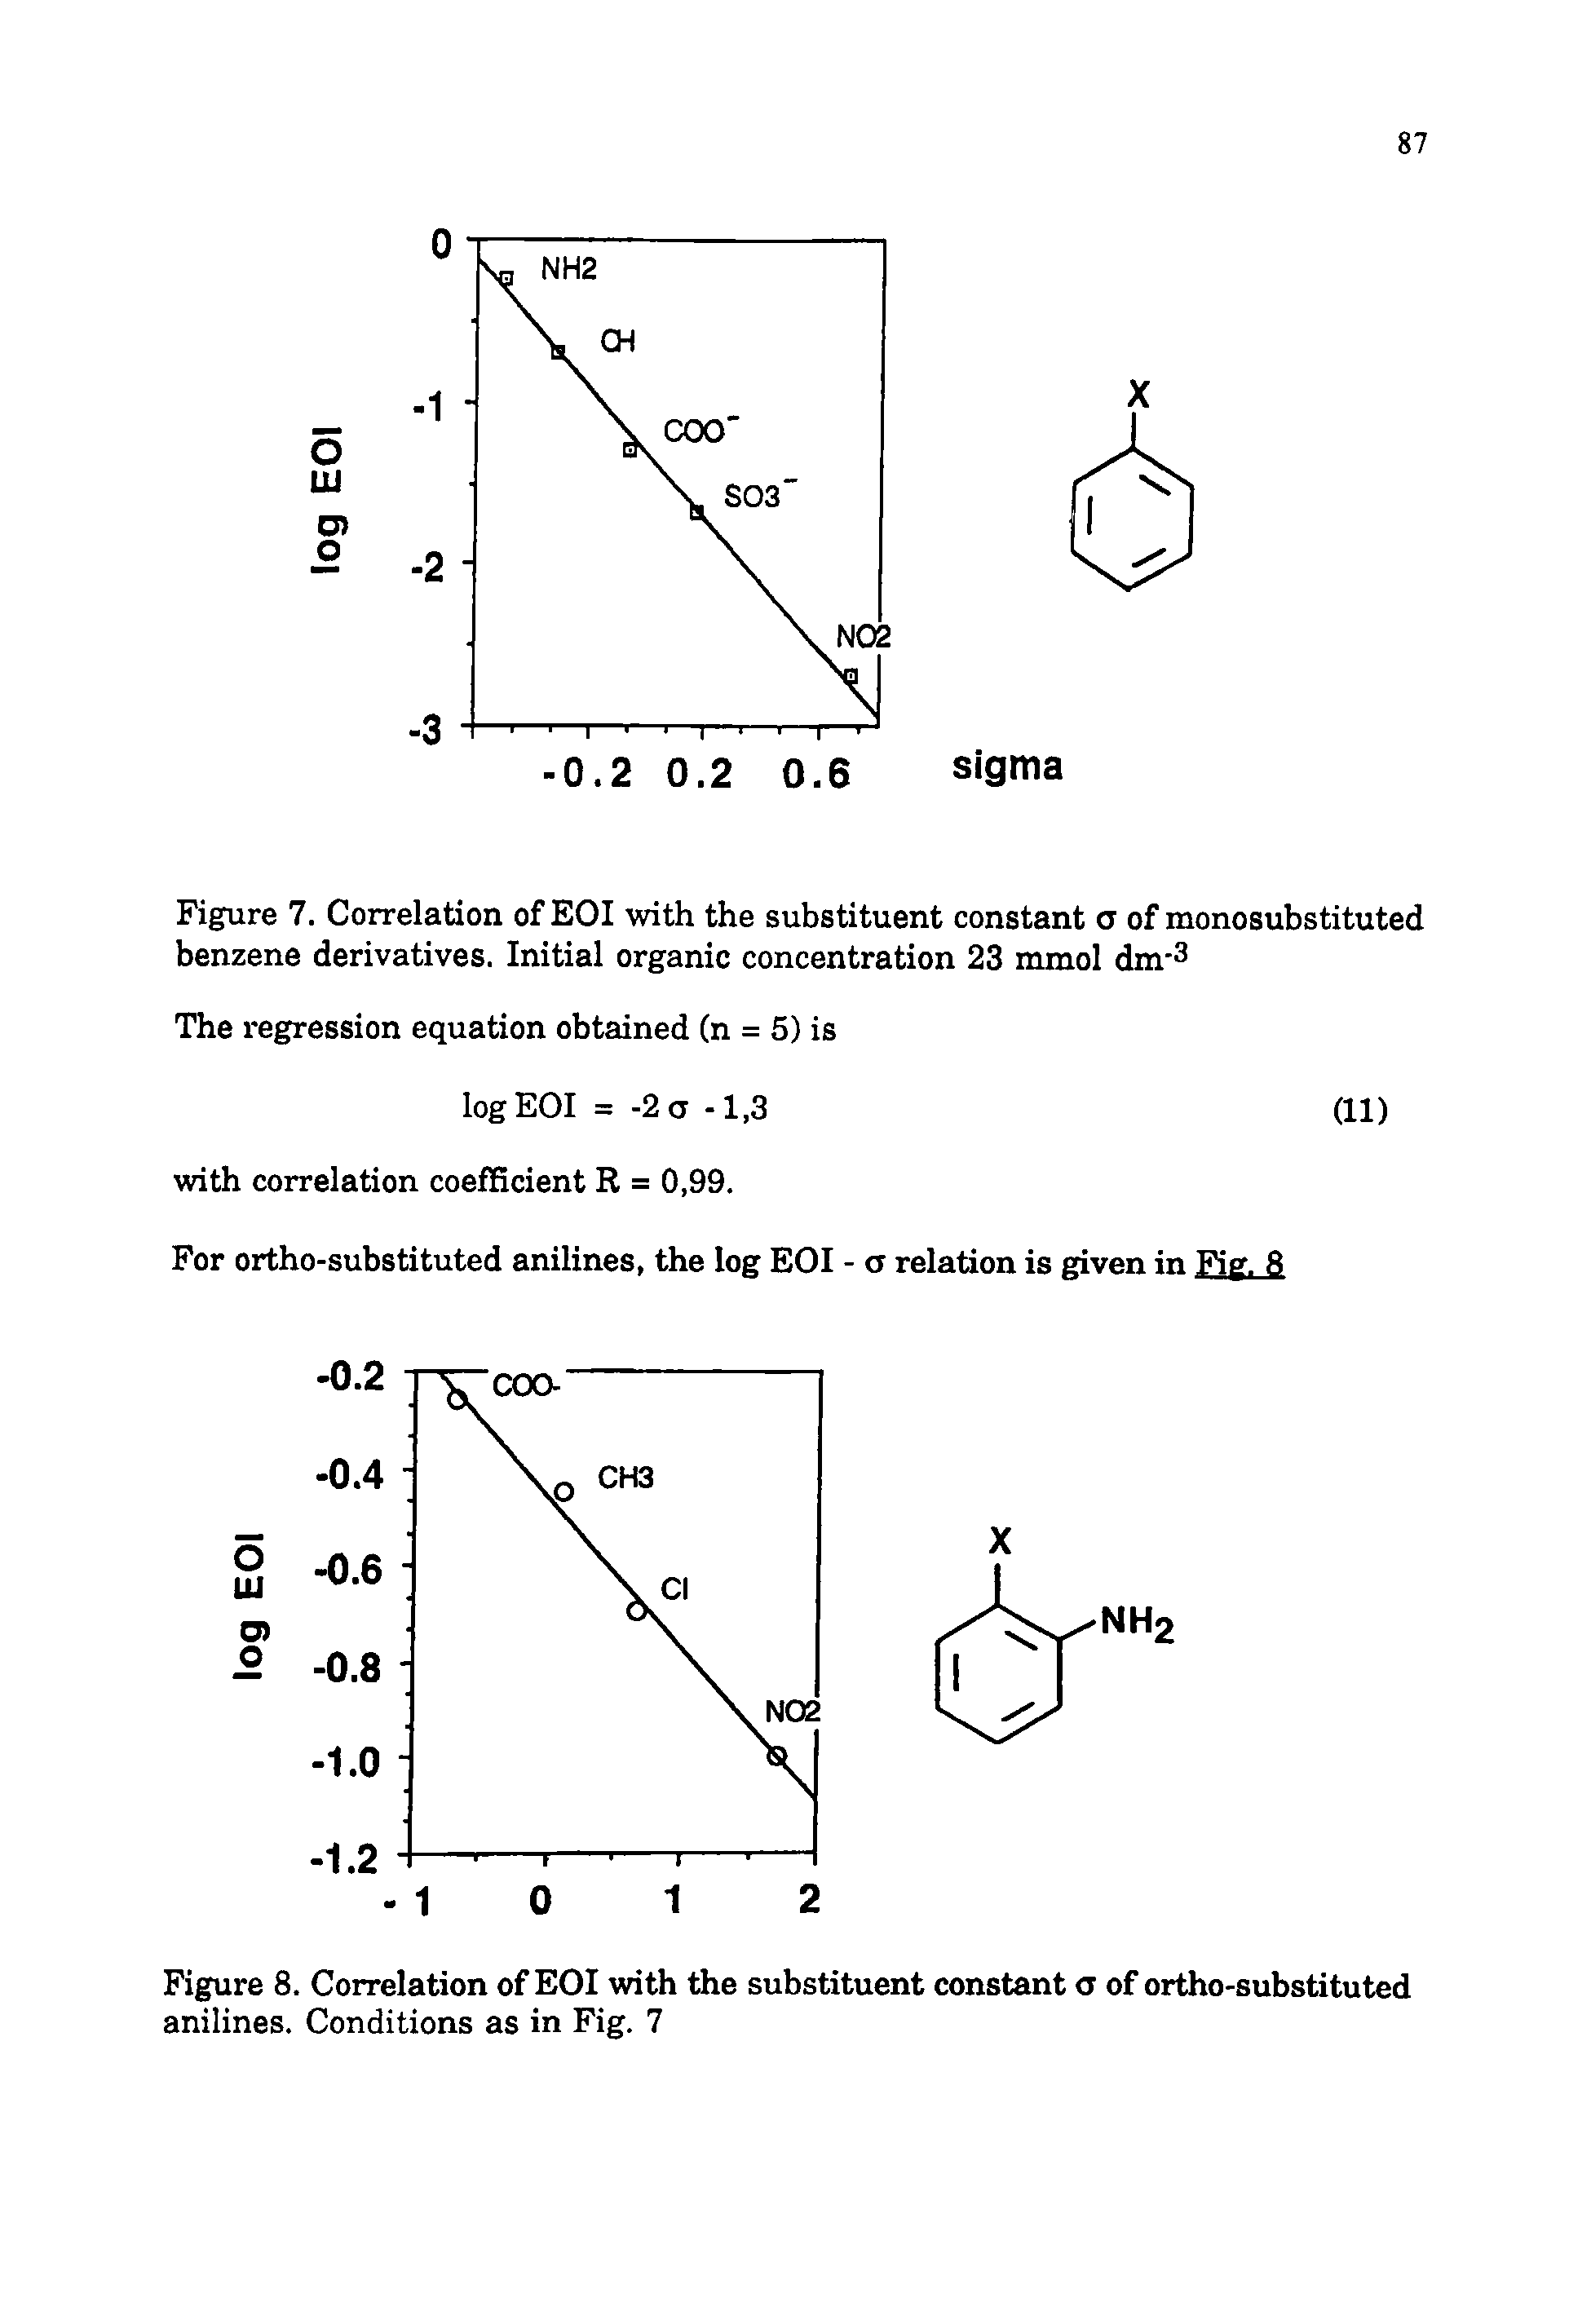 Figure 8. Correlation of EOI with the substituent constant a of ortho-substituted anilines. Conditions as in Fig. 7...